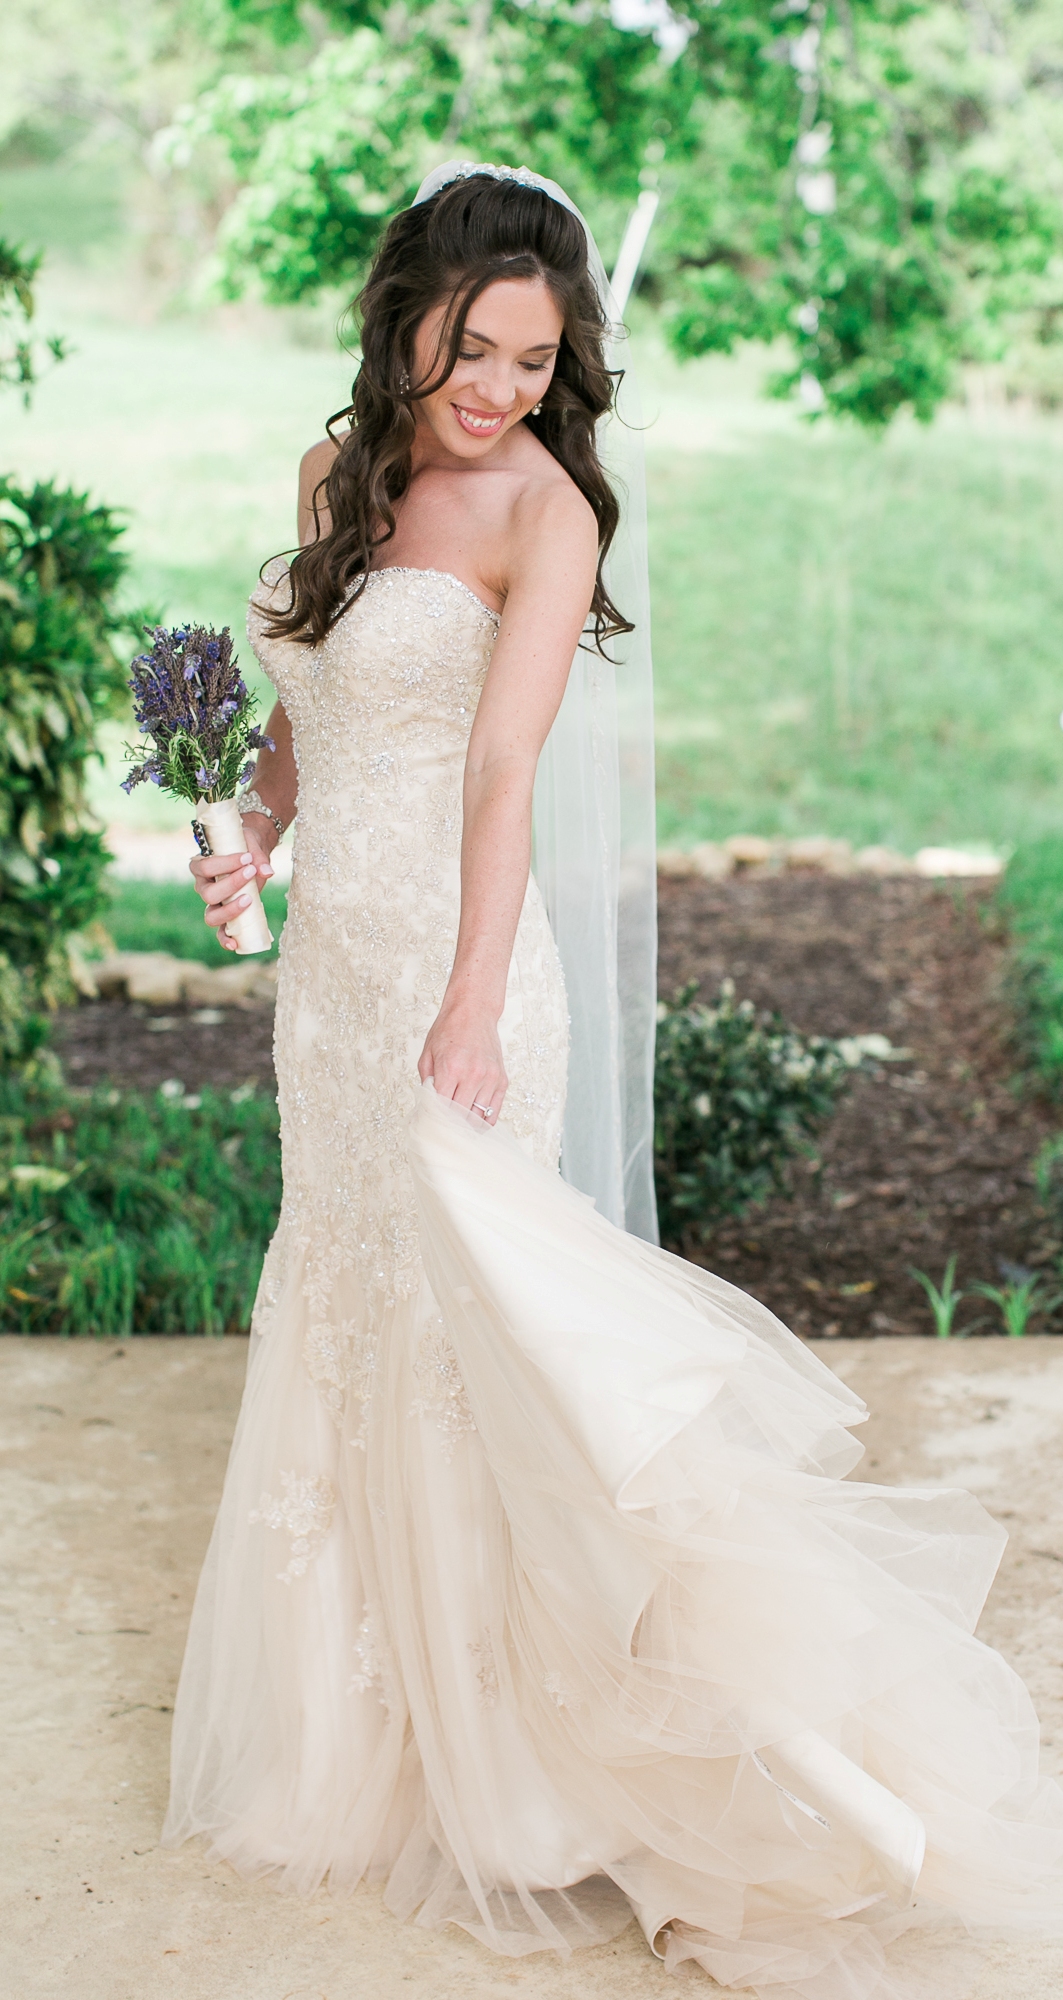 Champagne Colored Wedding Dress